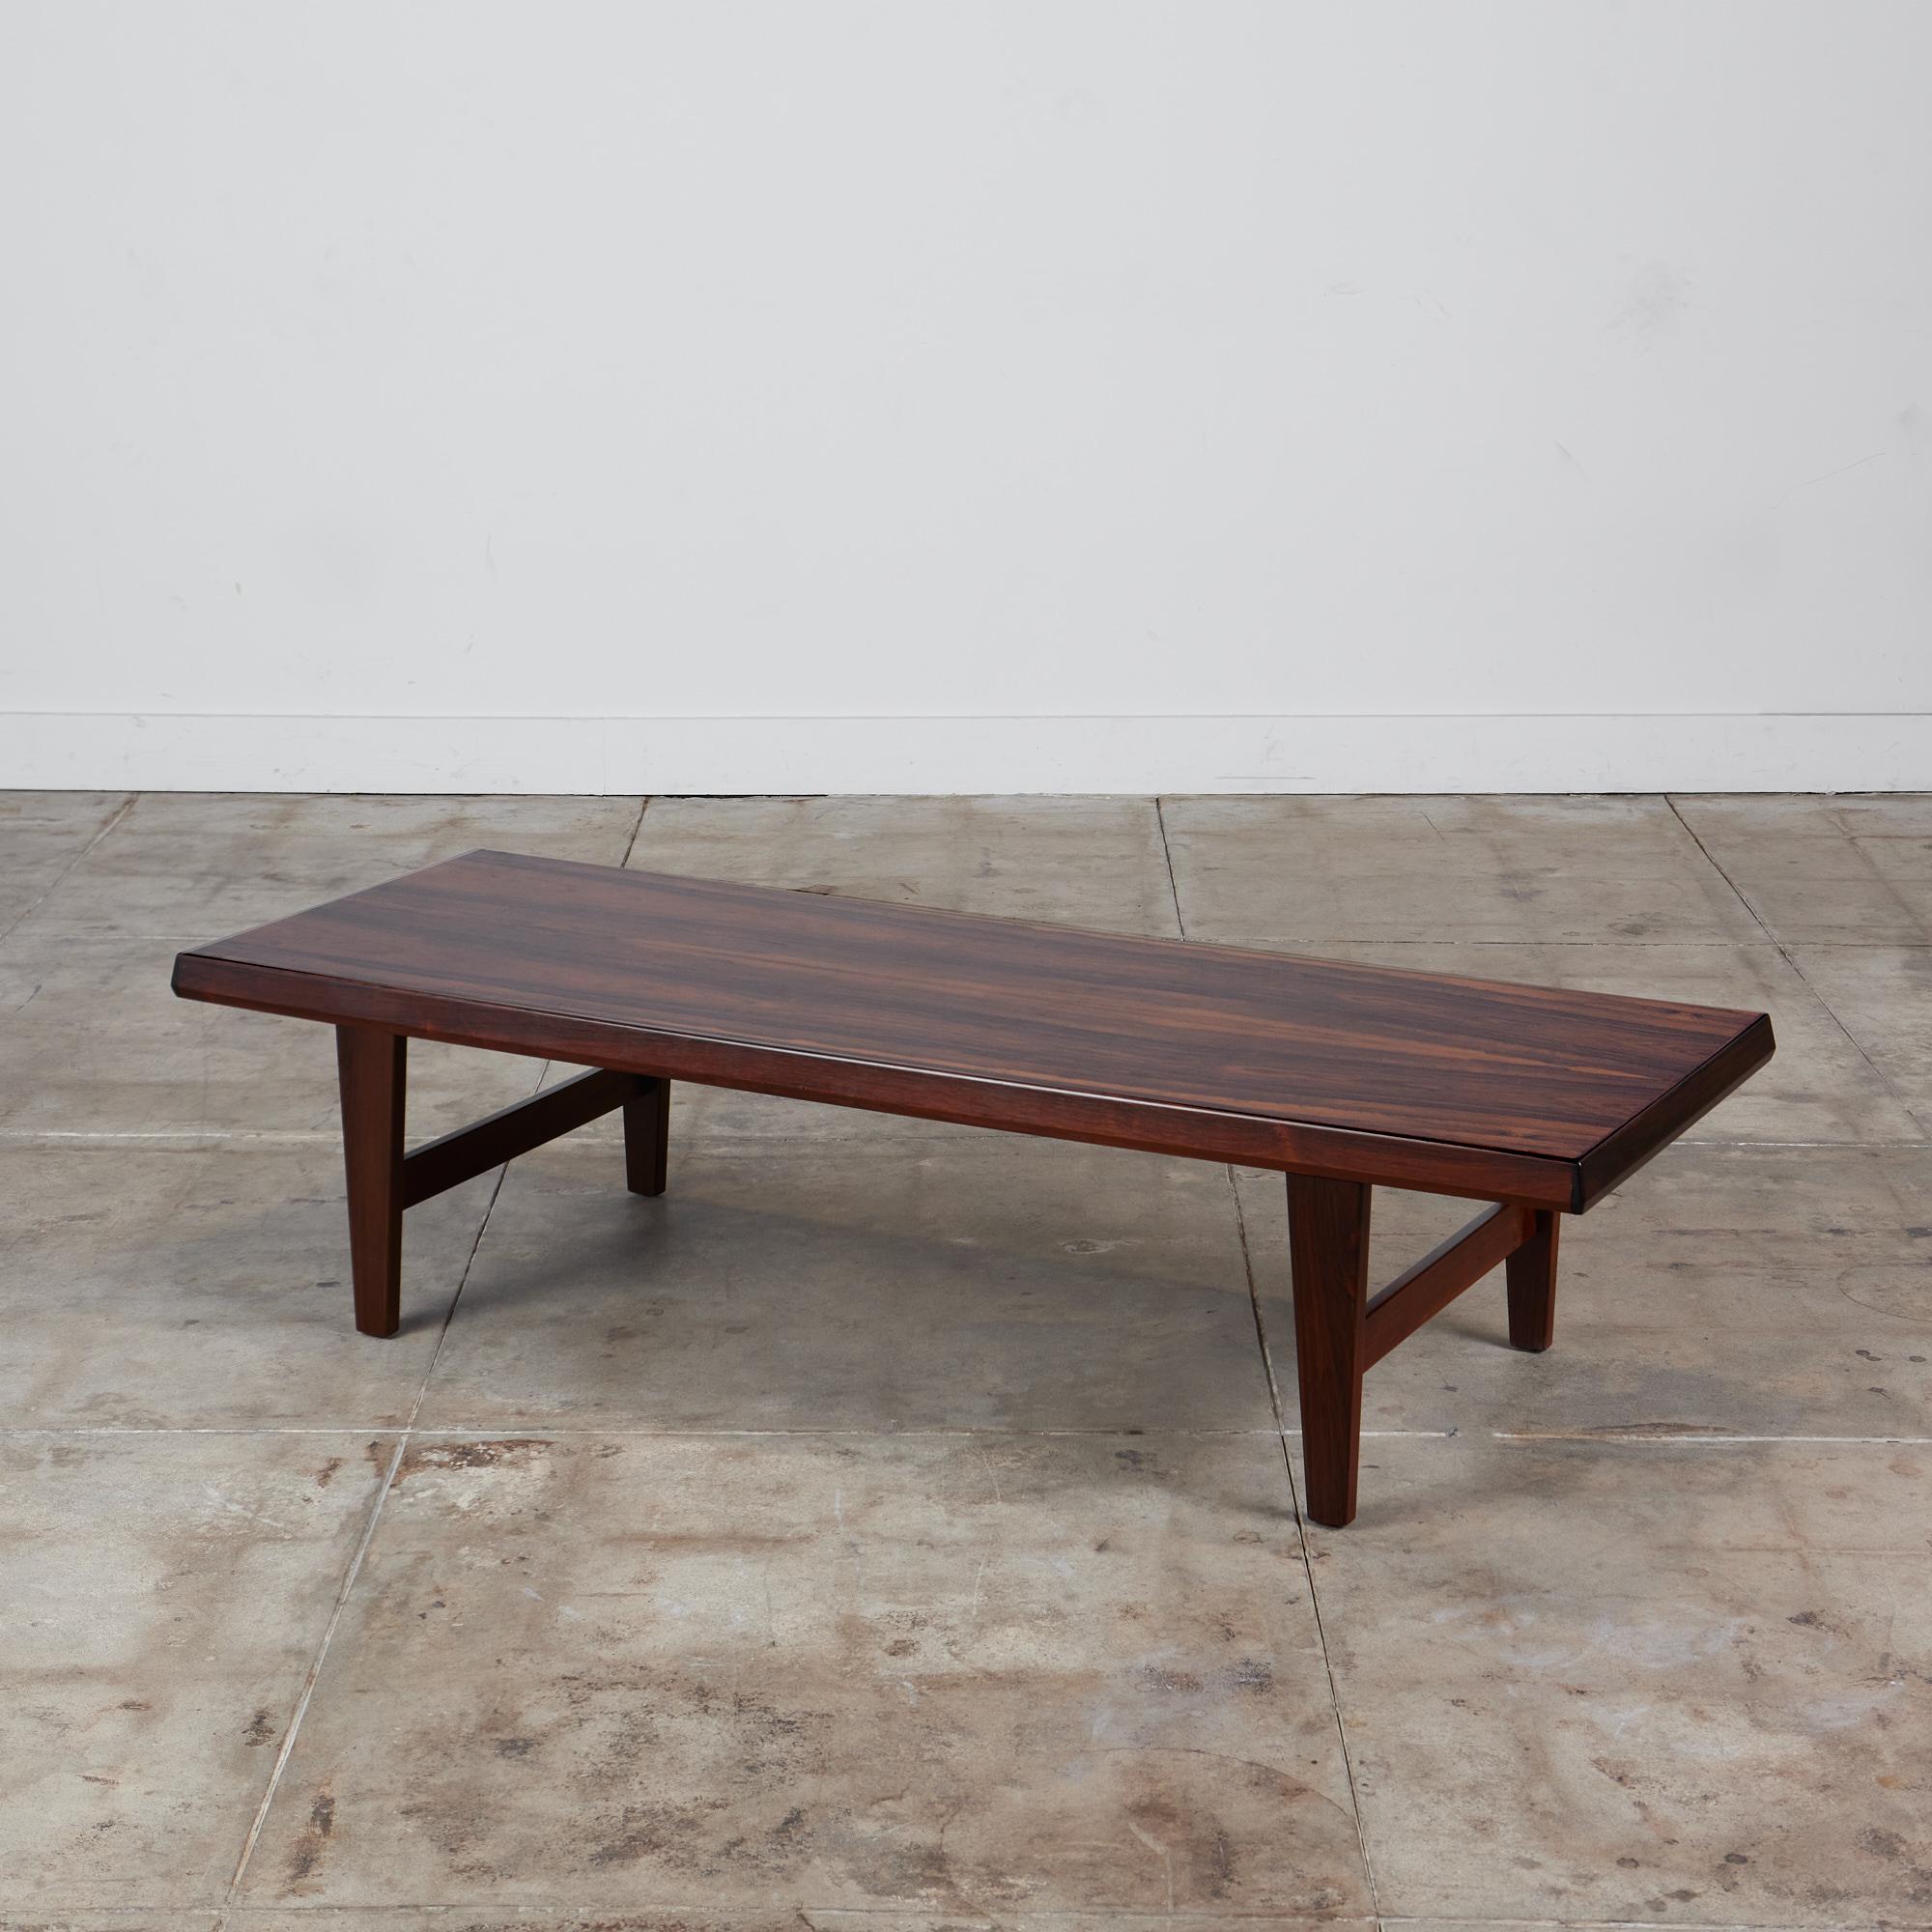 A generously proportioned, coffee table in highly figured Brazilian Rosewood by Niels Bach, a manufacturer based in Randers, Denmark. The long tabletop has angled edges and is thick enough for the piece to double as a bench. The table is supported